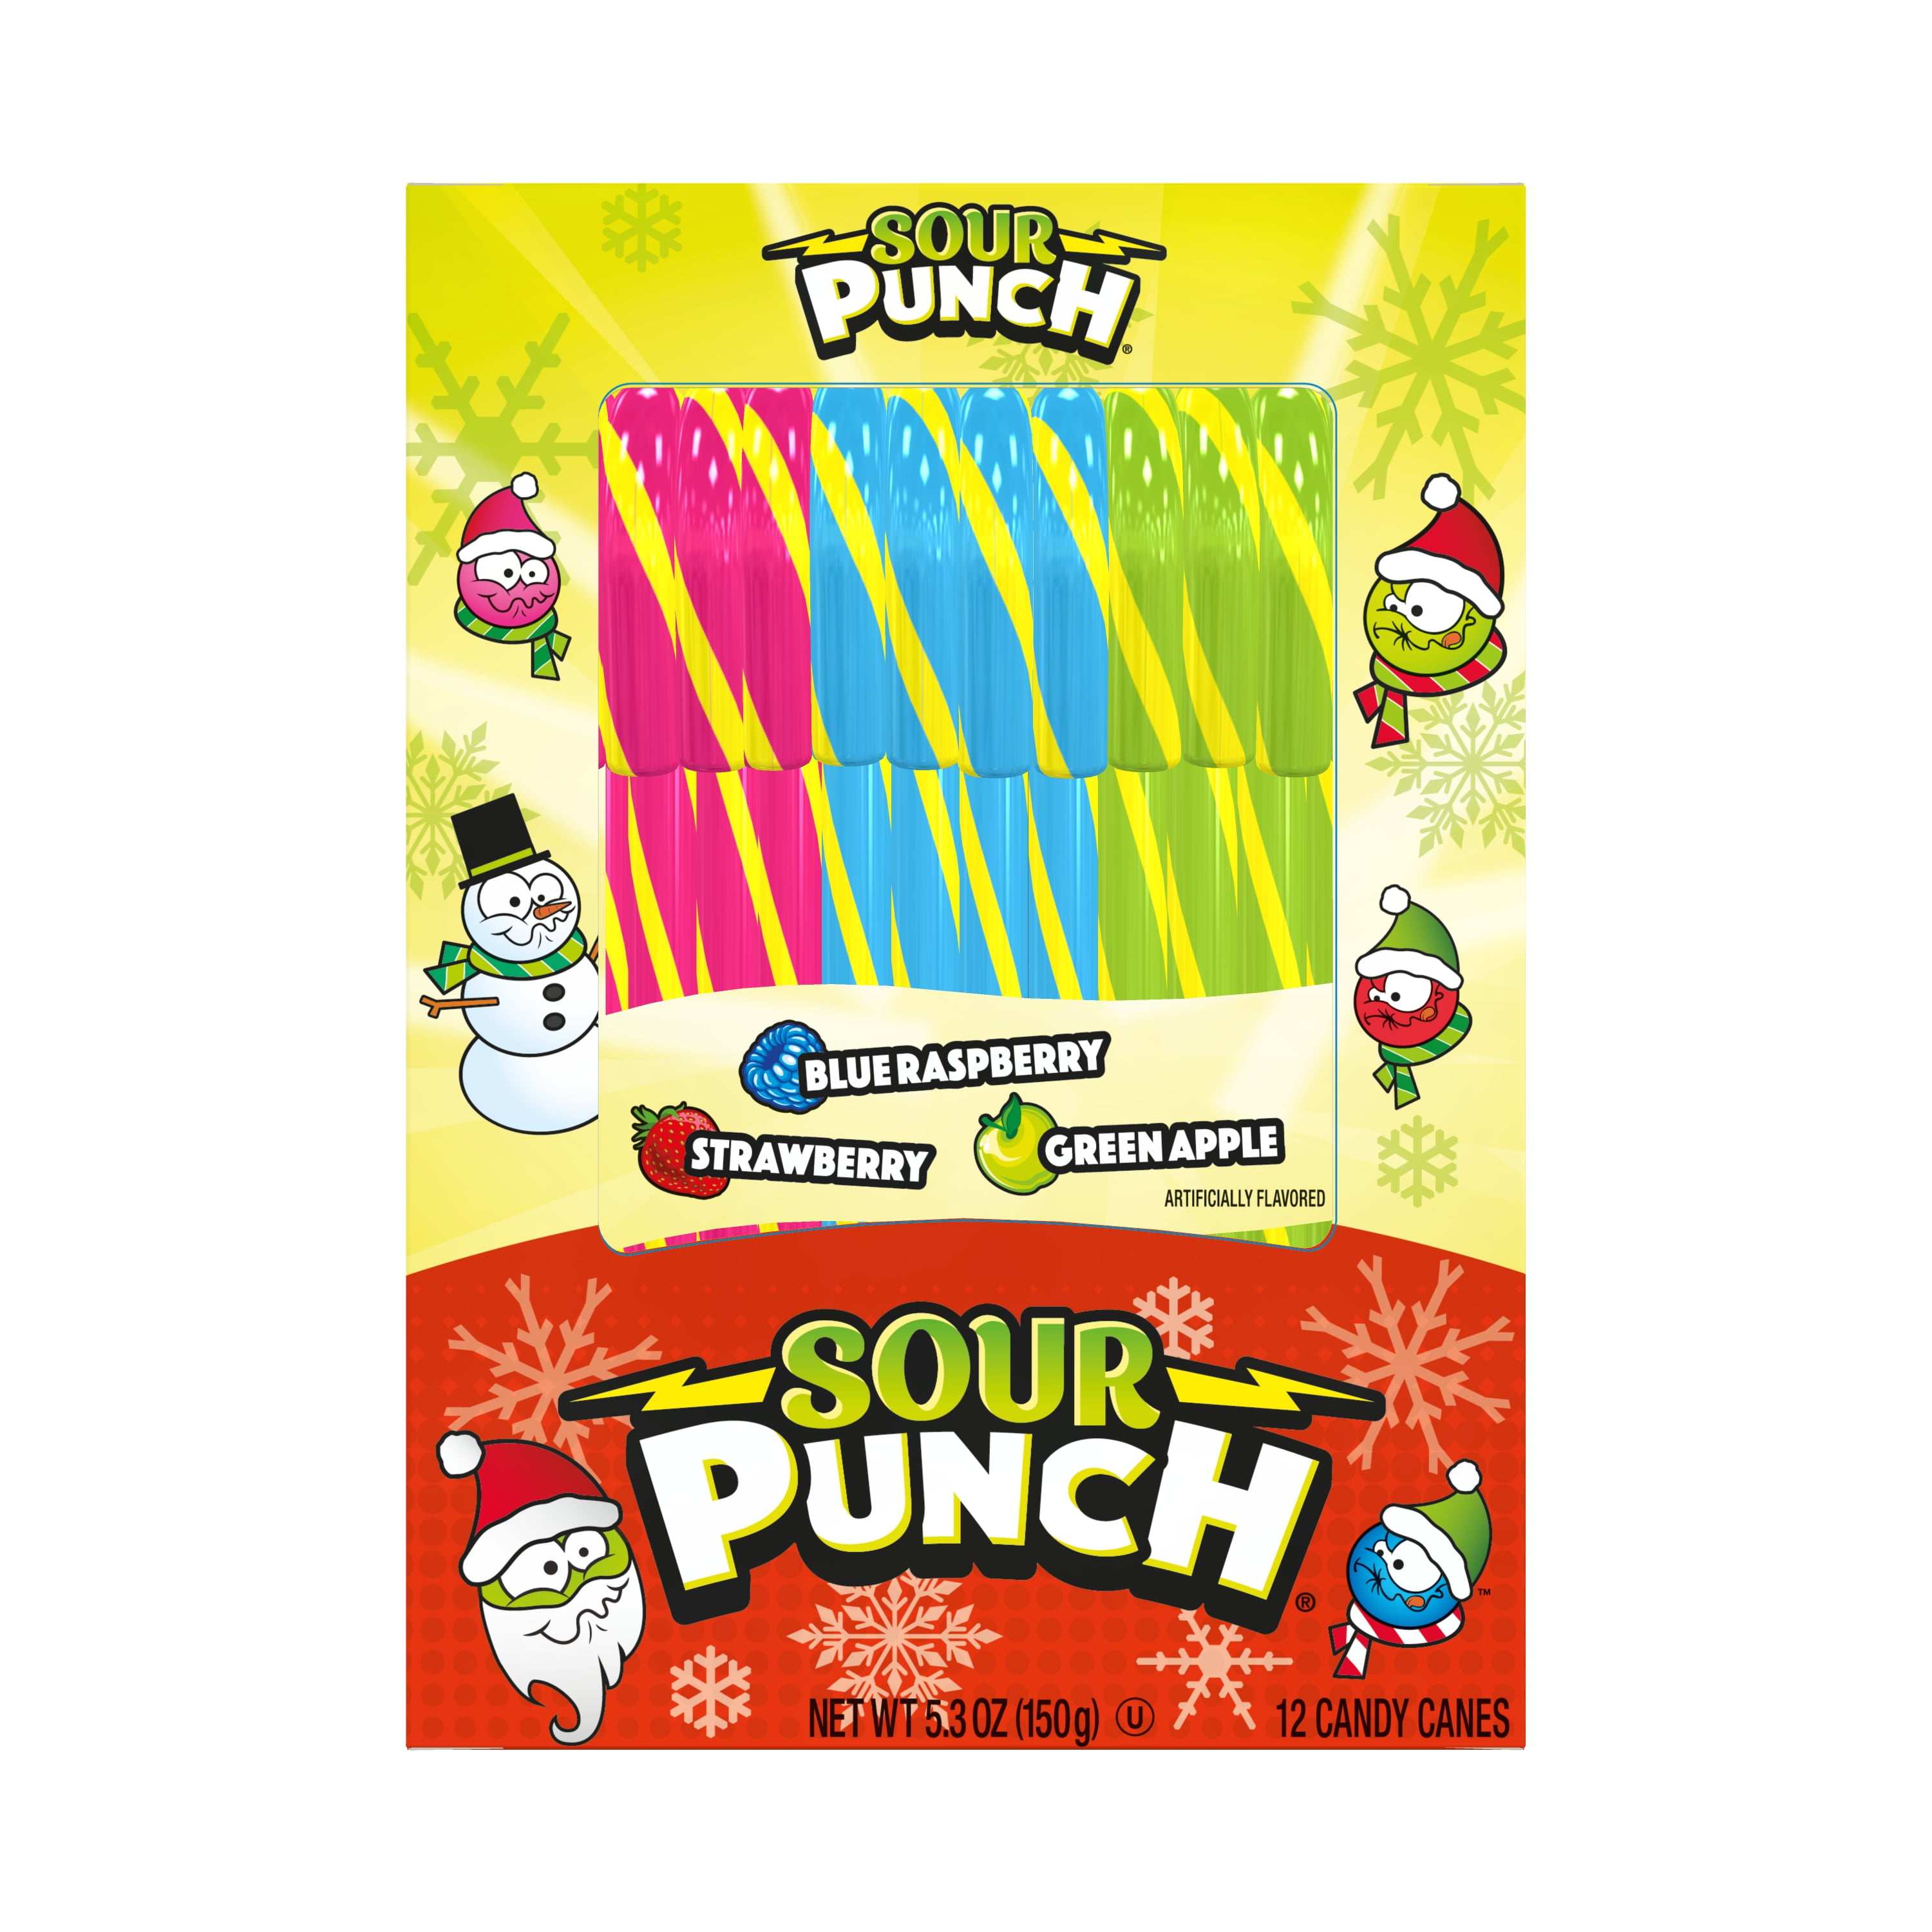 Spangler Sour Punch Candy Canes 12ct, Christmas Gluten and Nut